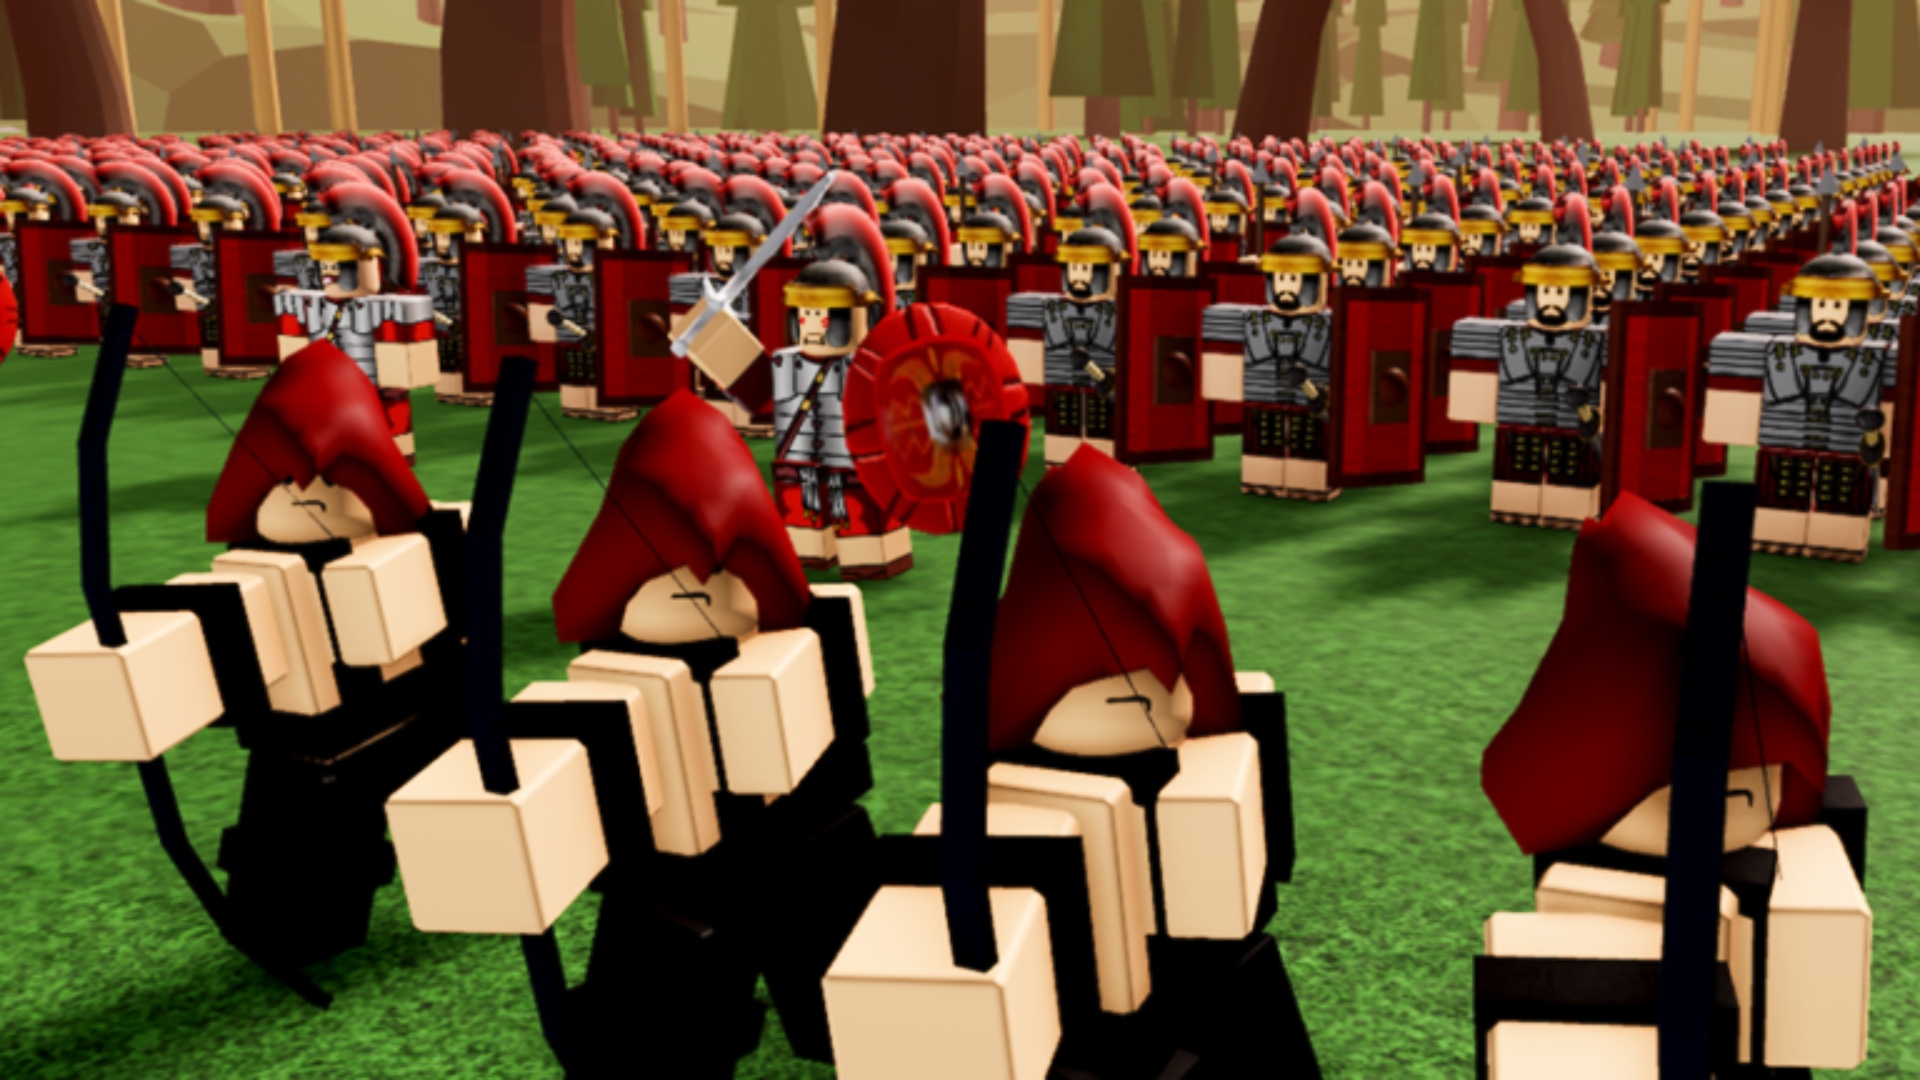 Roblox Anime Fighting Tycoon codes (February 2023)